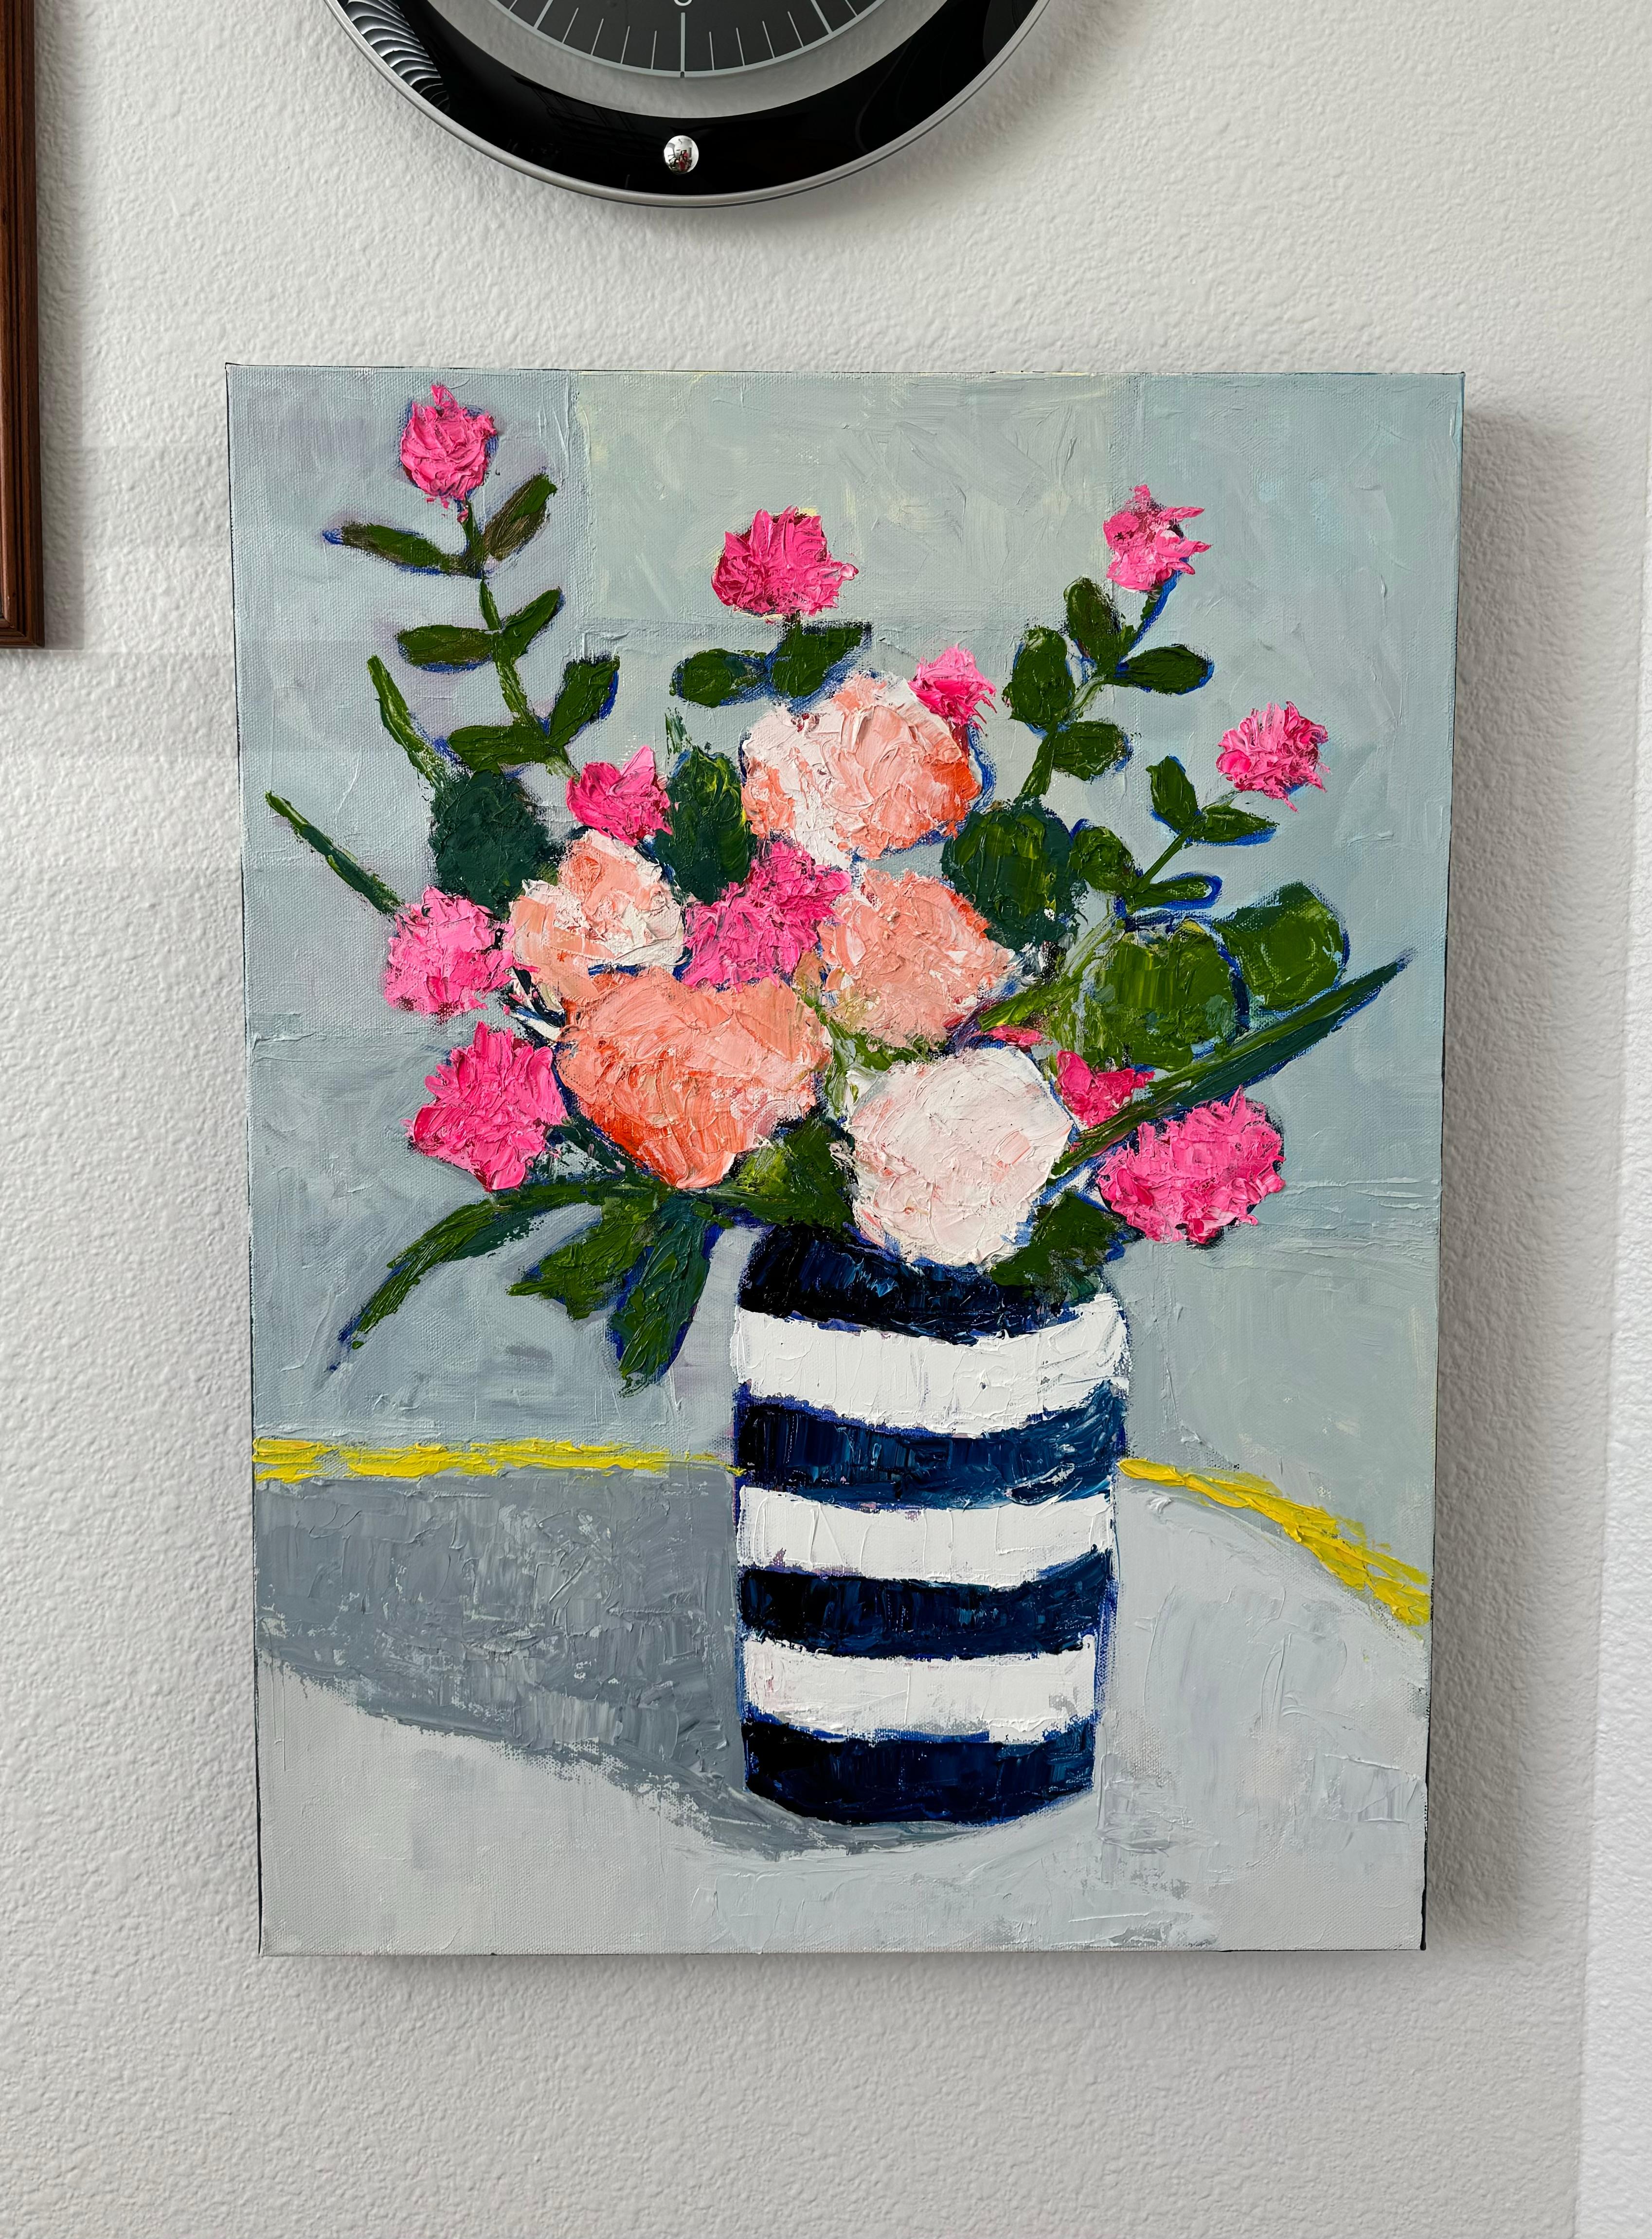 <p>Artist Comments<br>This still-life painting features a lively bouquet of pink flowers in a vase. Painted with a palette knife, the various blooms carry subtle textures, adding depth and dimension to the artwork. The blushing hues complement the